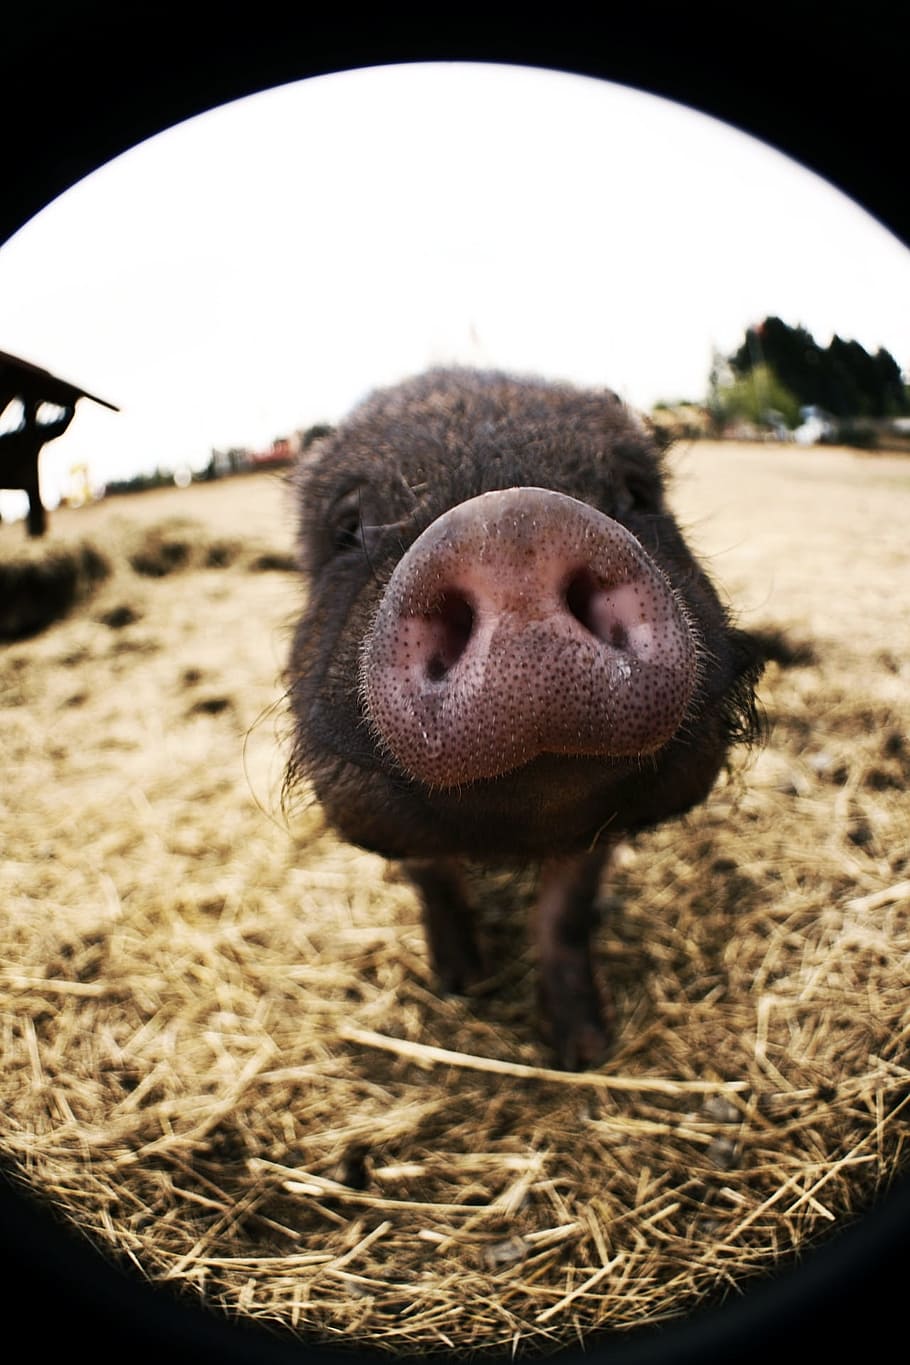 fish, eye, photography, Pig, Nose, Sniffing, Smell, Snout, piglet, pig nose